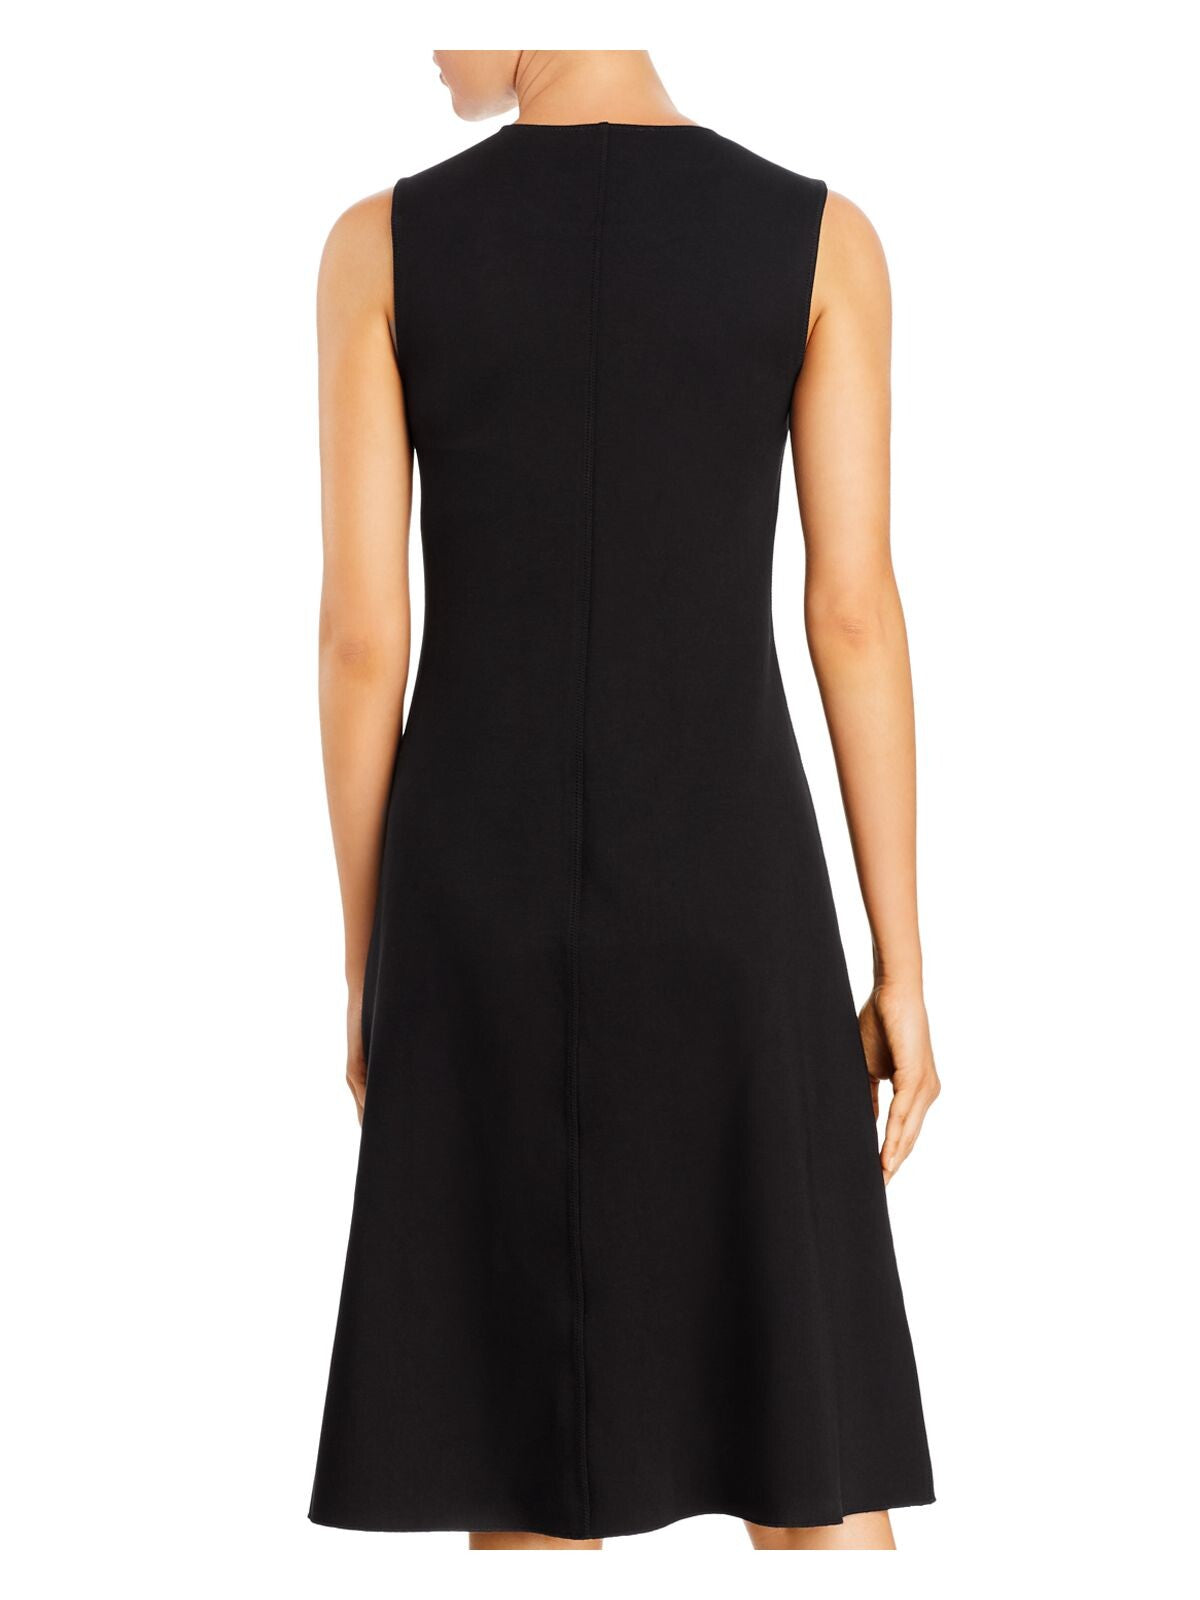 KENNETH COLE NEW YORK Womens Black Sleeveless Round Neck Knee Length Fit + Flare Dress XS